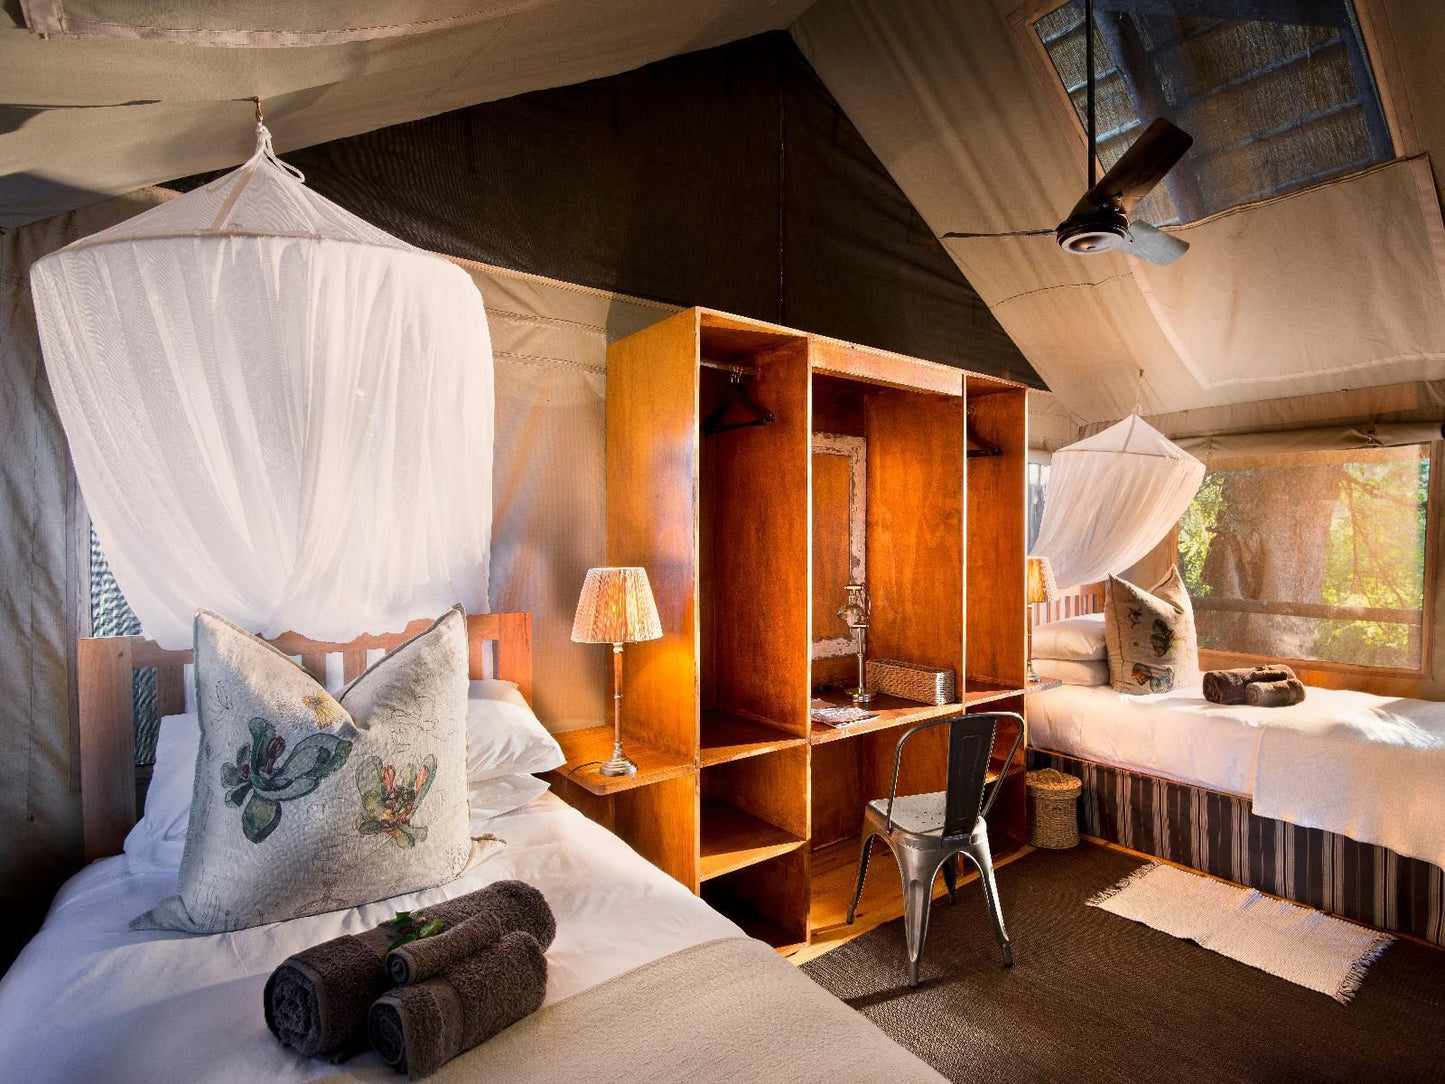 Baobab Hill Bush House North Kruger Park Mpumalanga South Africa Tent, Architecture, Bedroom